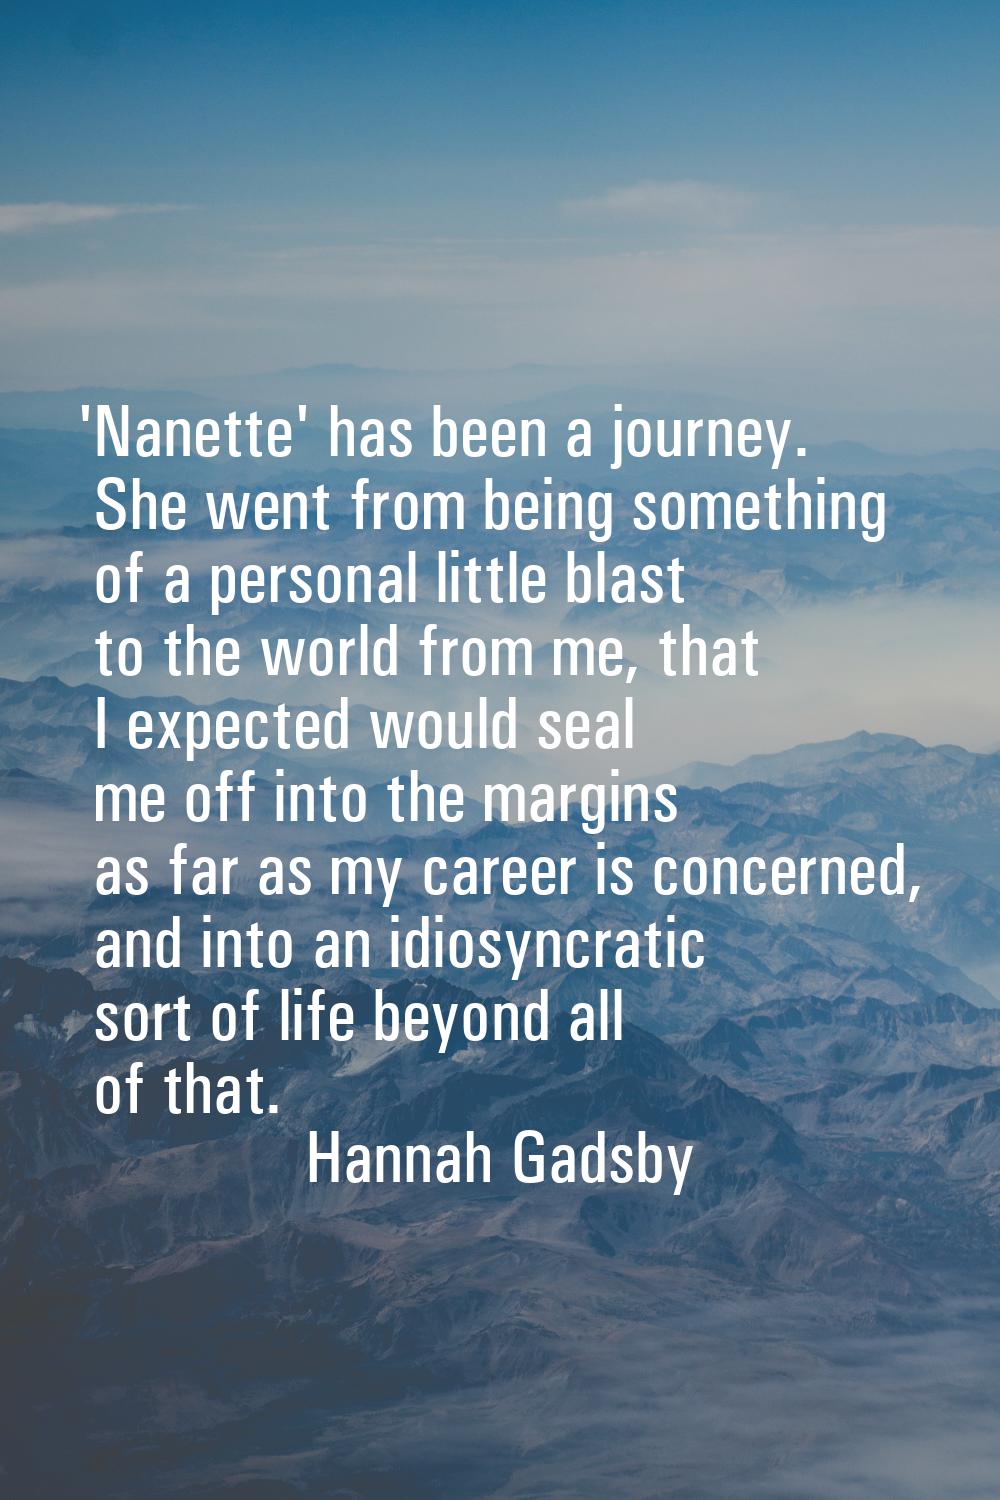 'Nanette' has been a journey. She went from being something of a personal little blast to the world